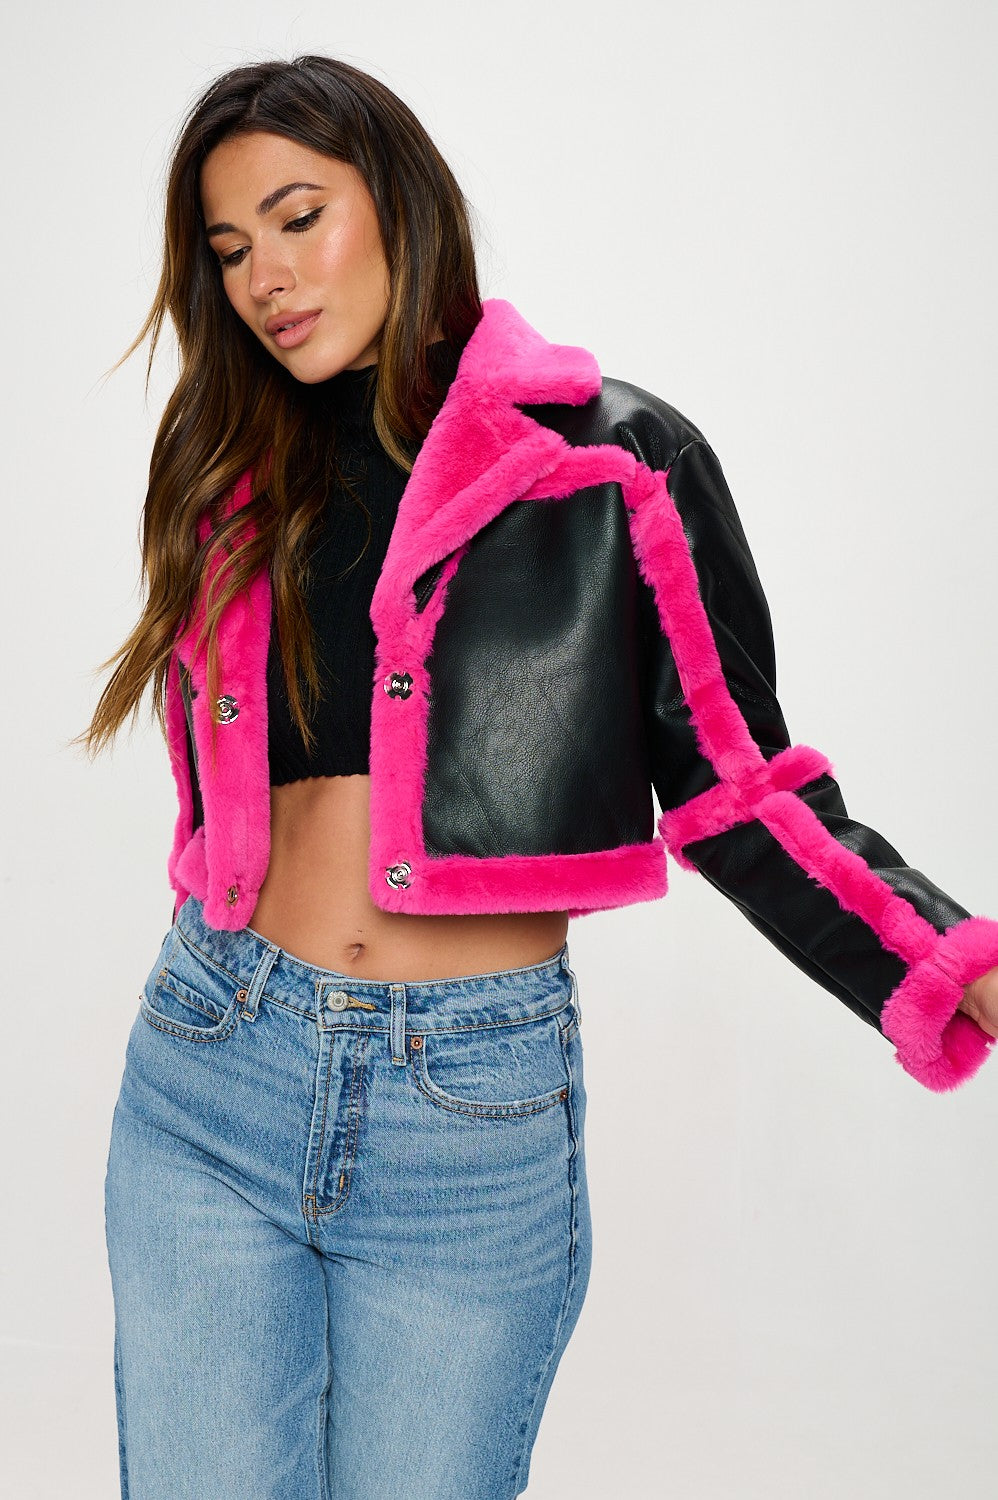 “Goonica” Cropped Faux Leather Jacket